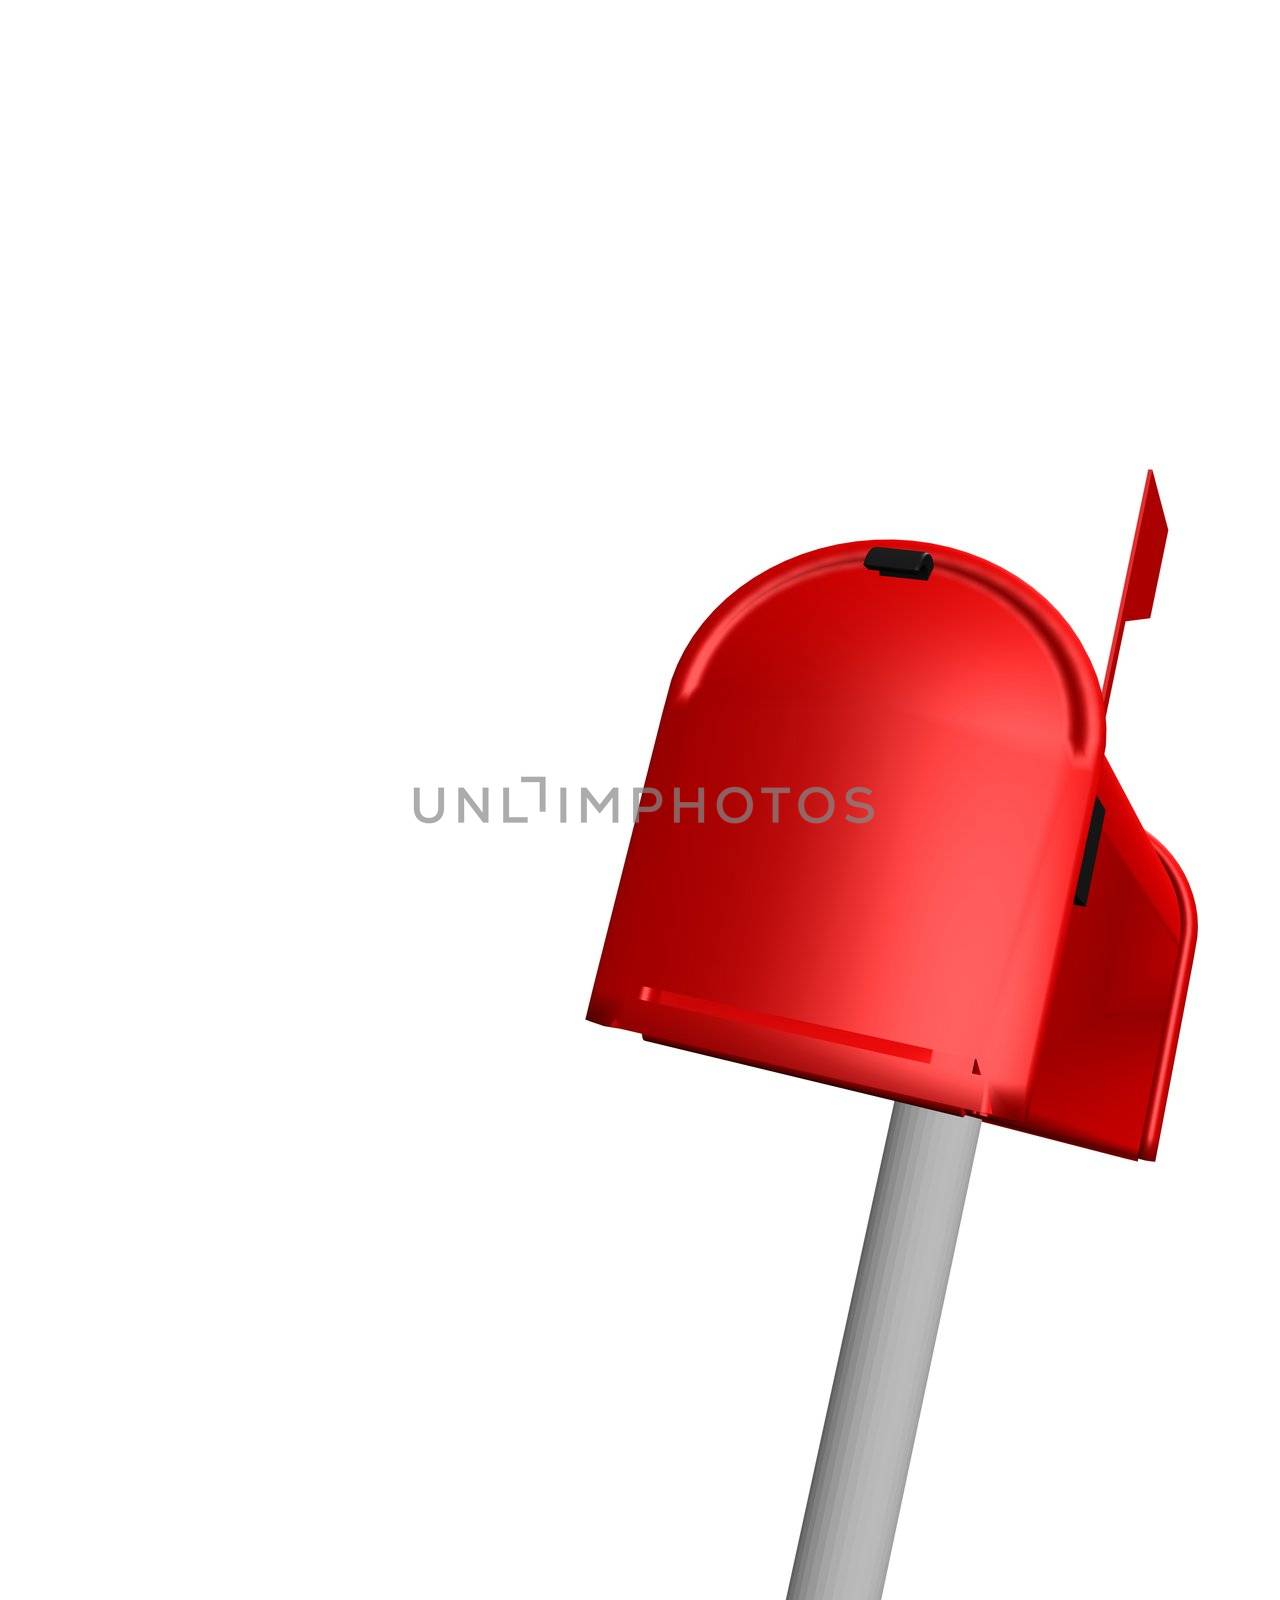 mailbox red on white background